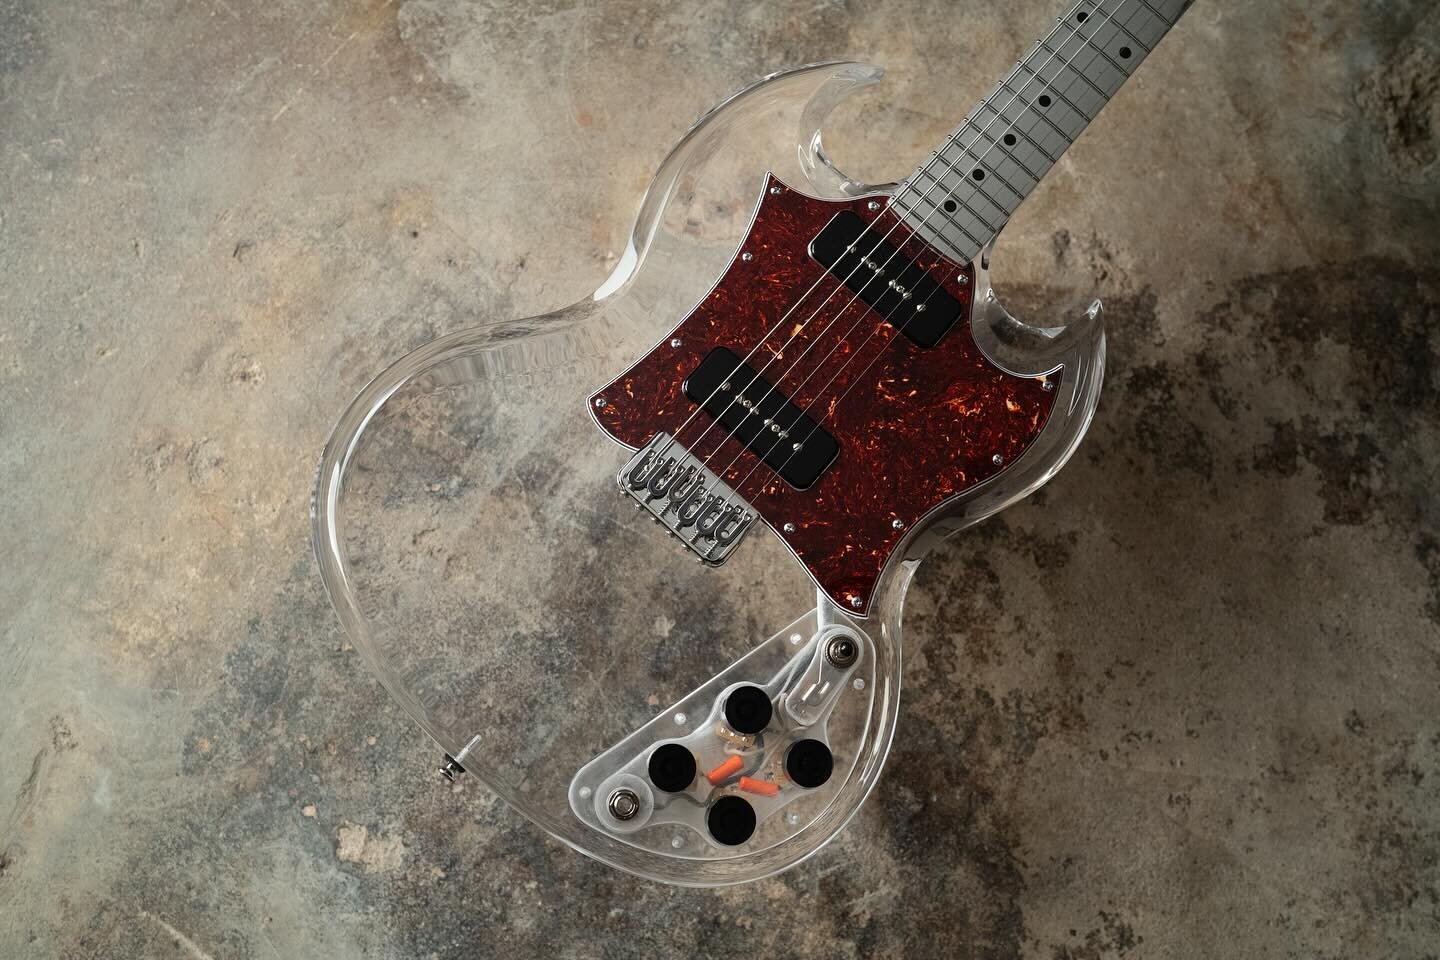 &ldquo;Gentlemen, we can rebuild him: we have the technology.&rdquo;

It&rsquo;s not the first bionic guitar, but it was a really sweet build to be involved in. This one is sort of a collaboration with @scalemodelguitars - Dave originally built the g